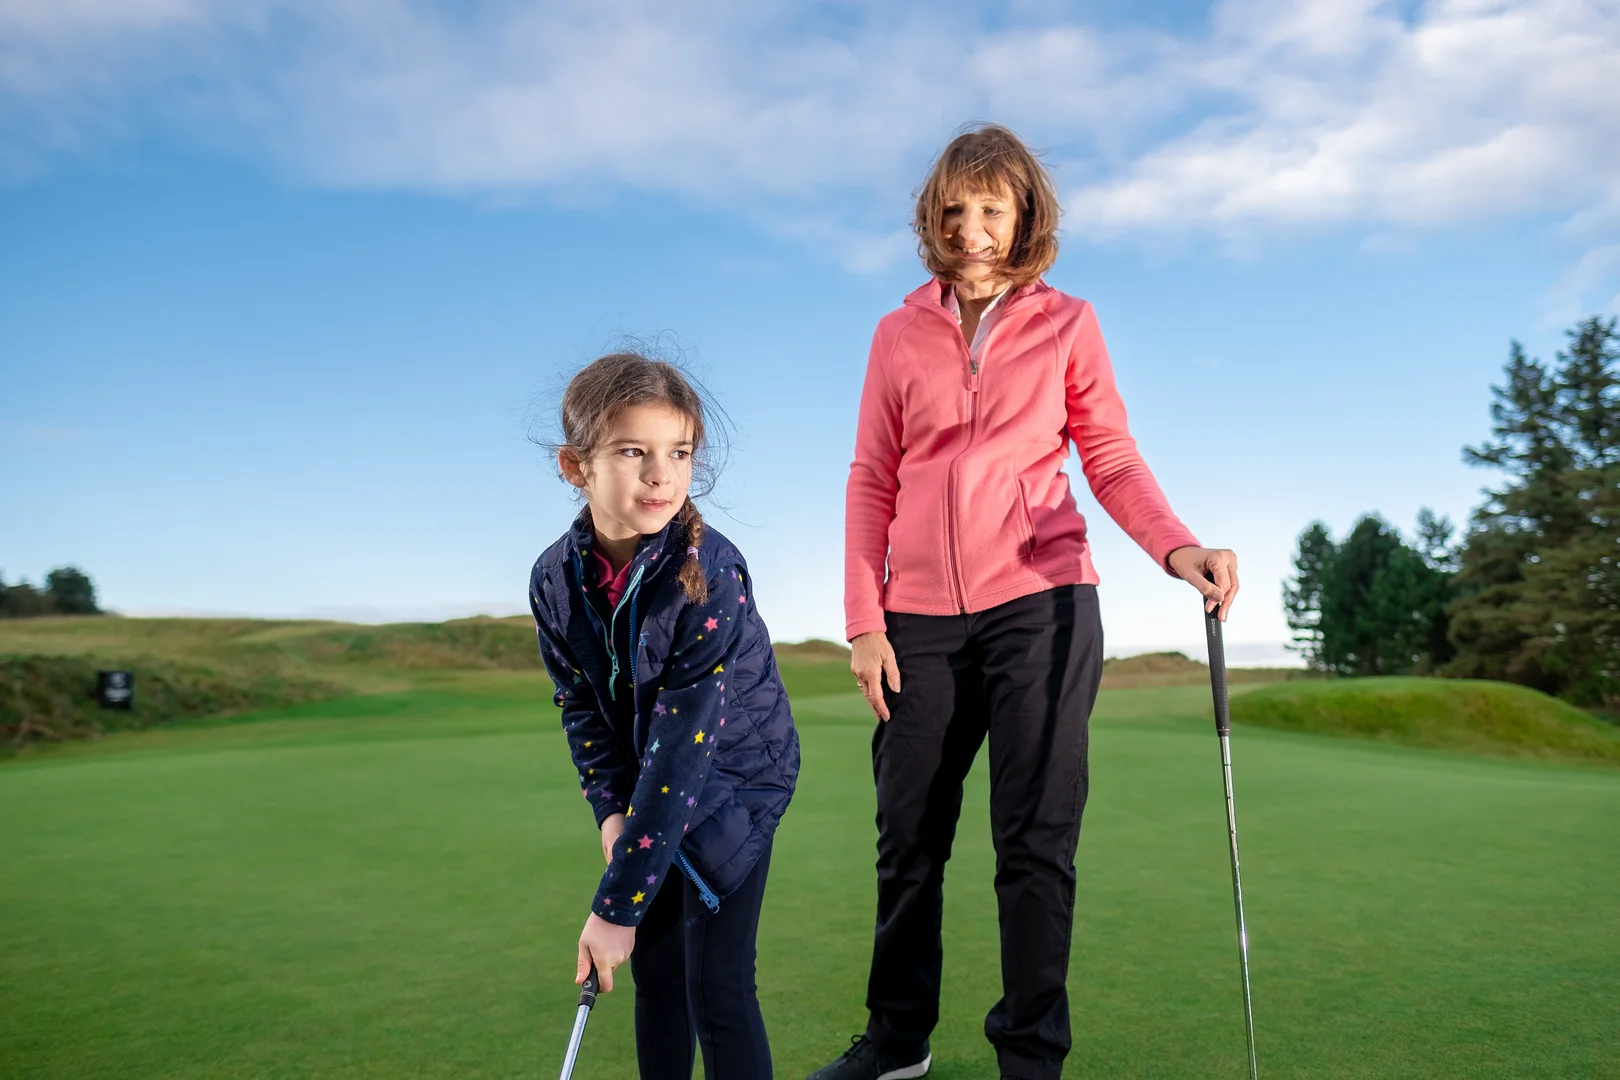 women and girl on a golf course